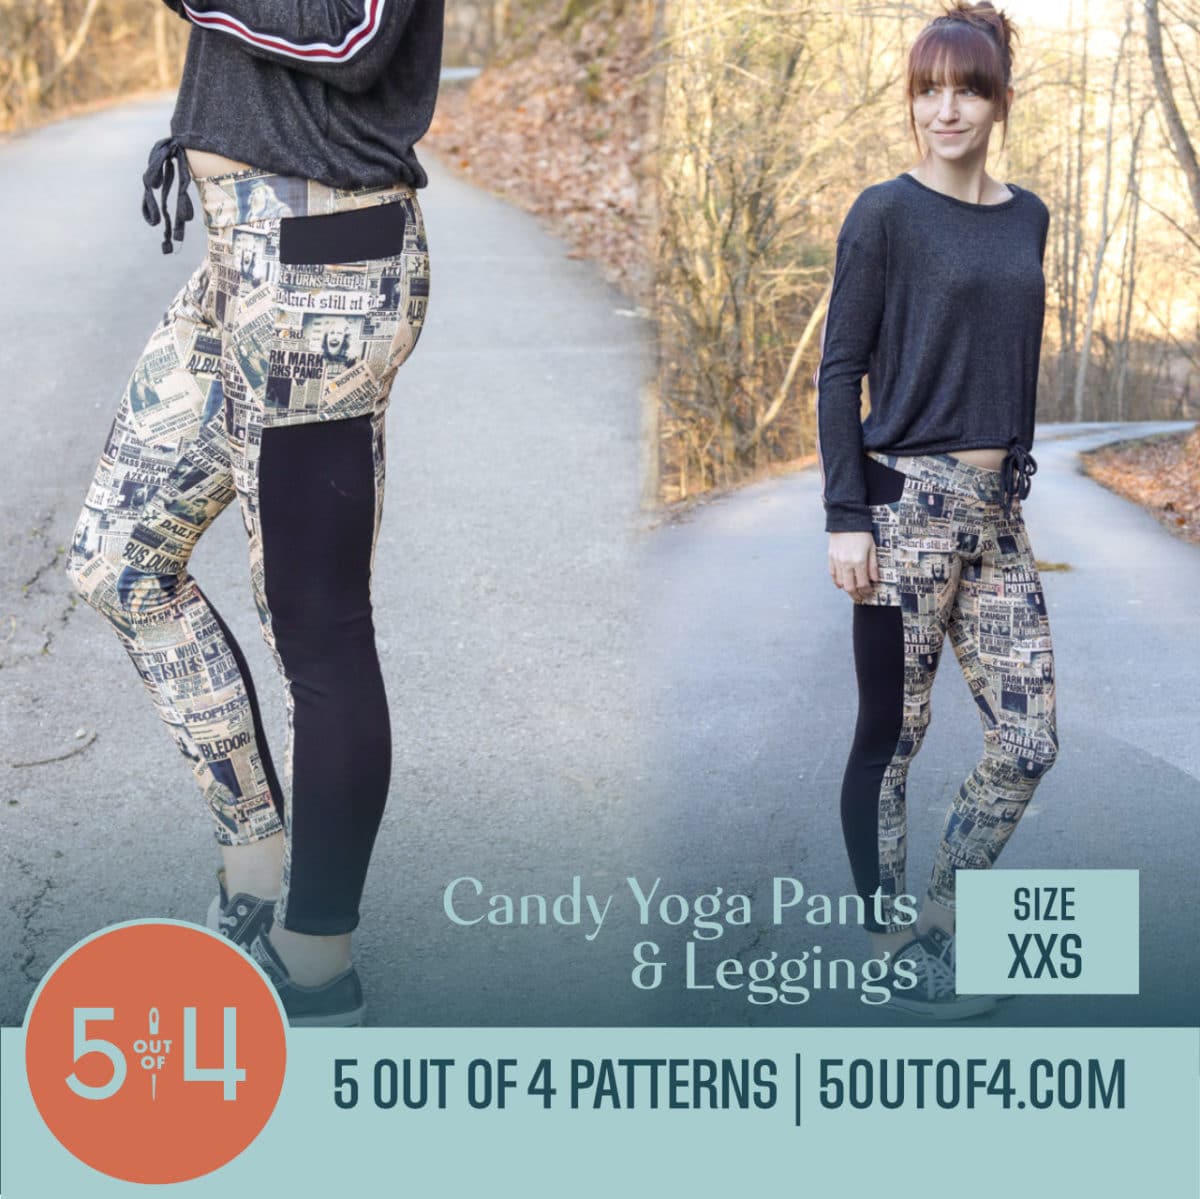 Candy Yoga Pants and Leggings - 5 out of 4 Patterns